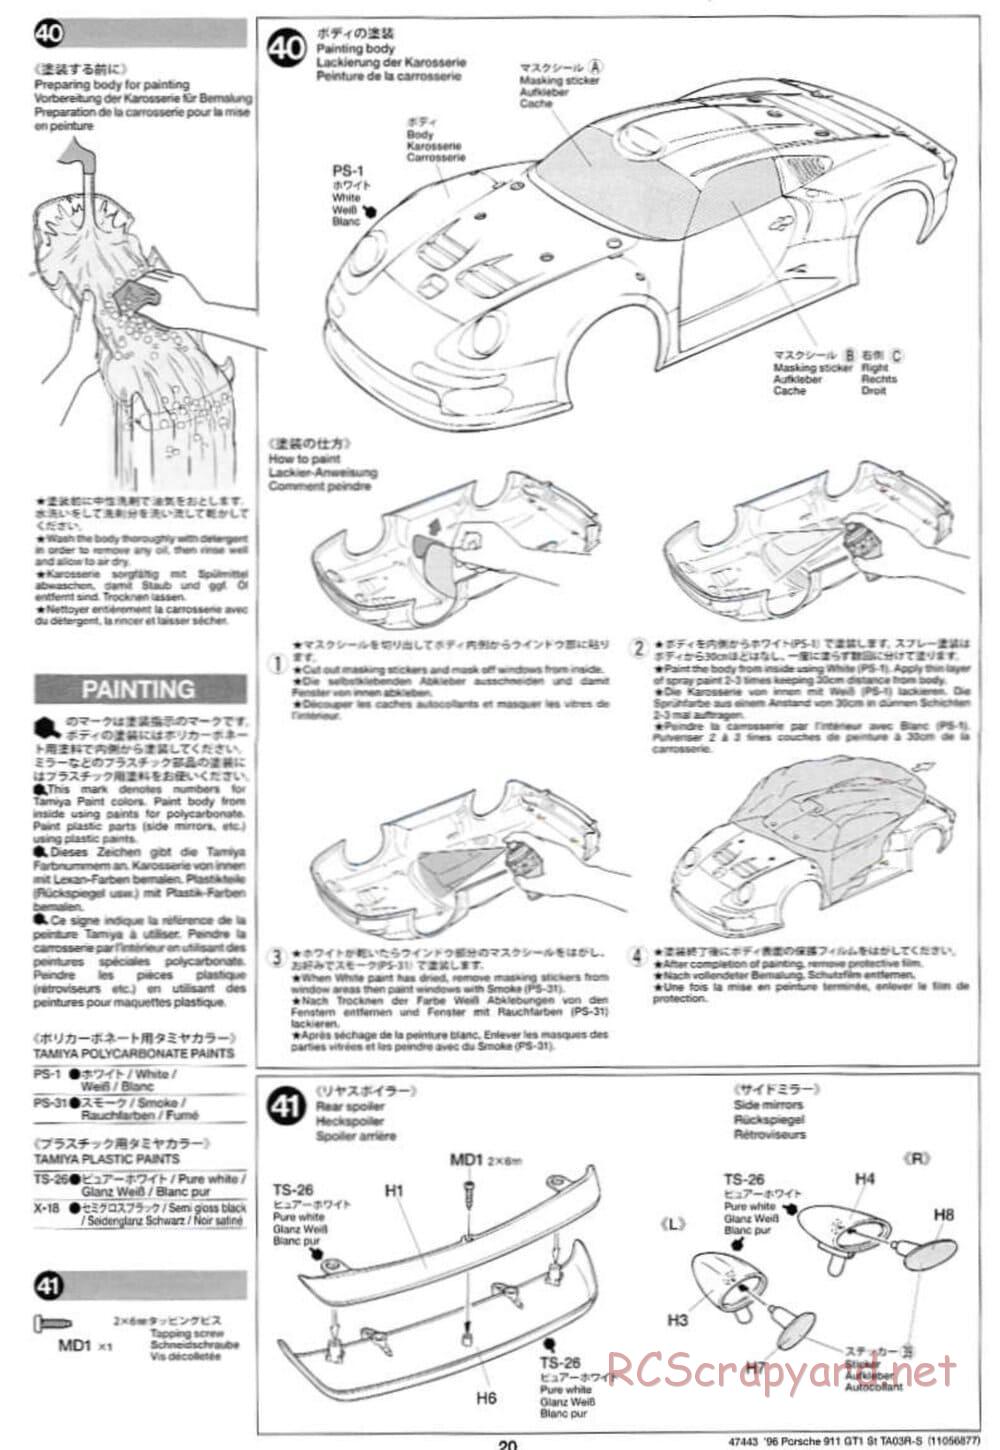 Tamiya - Porsche 911 GT1 Street - TA-03RS Chassis - Manual - Page 20